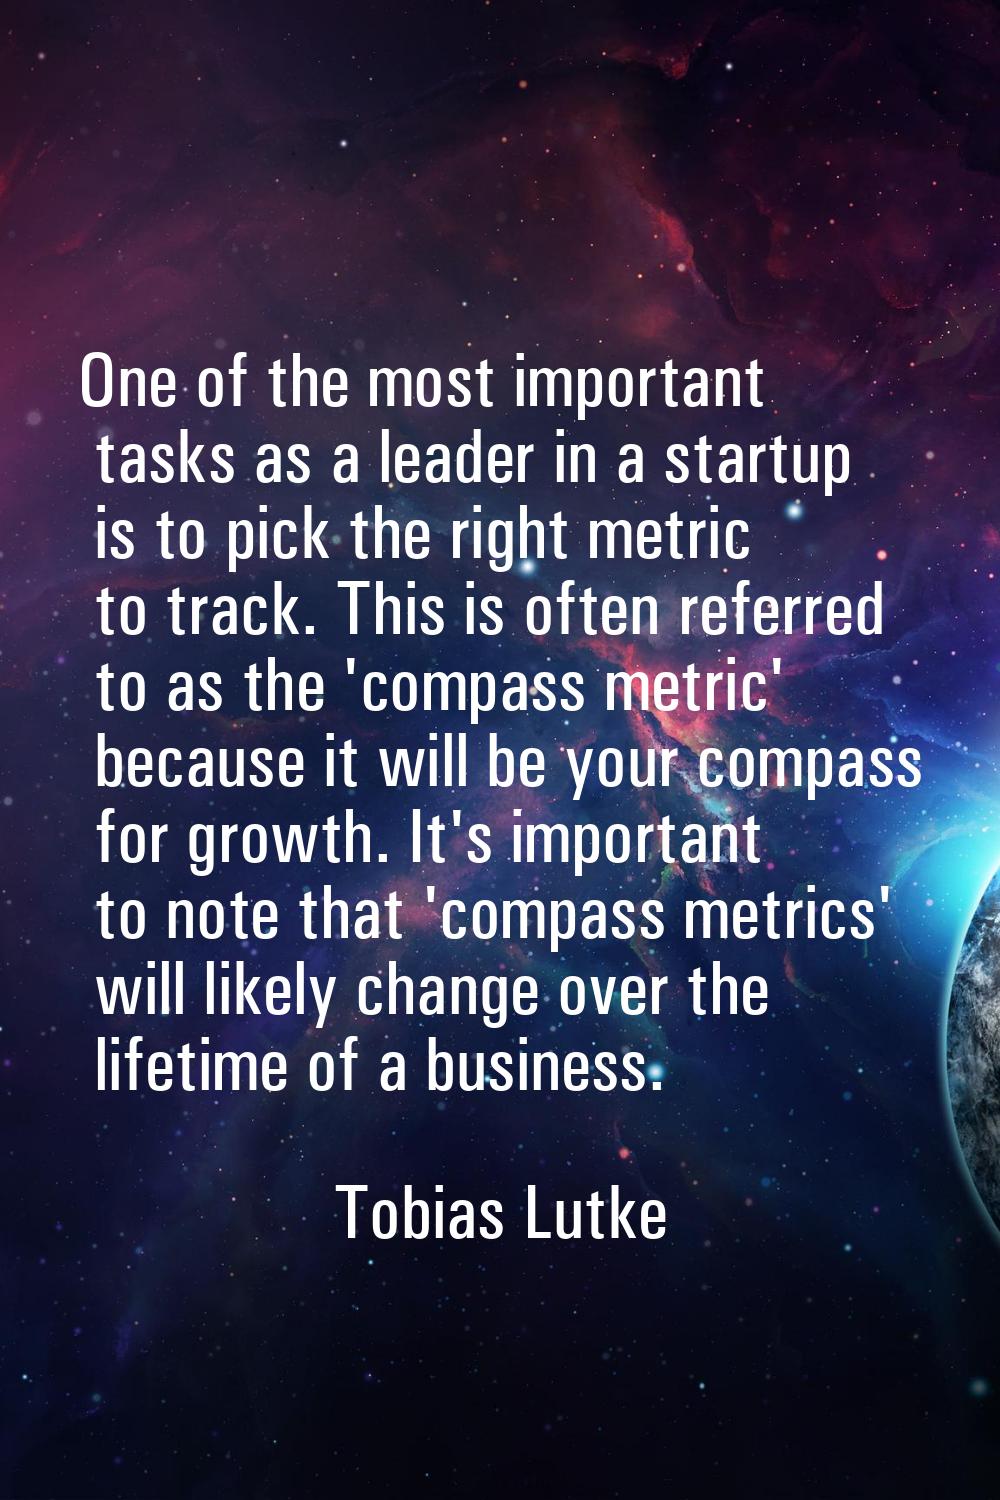 One of the most important tasks as a leader in a startup is to pick the right metric to track. This